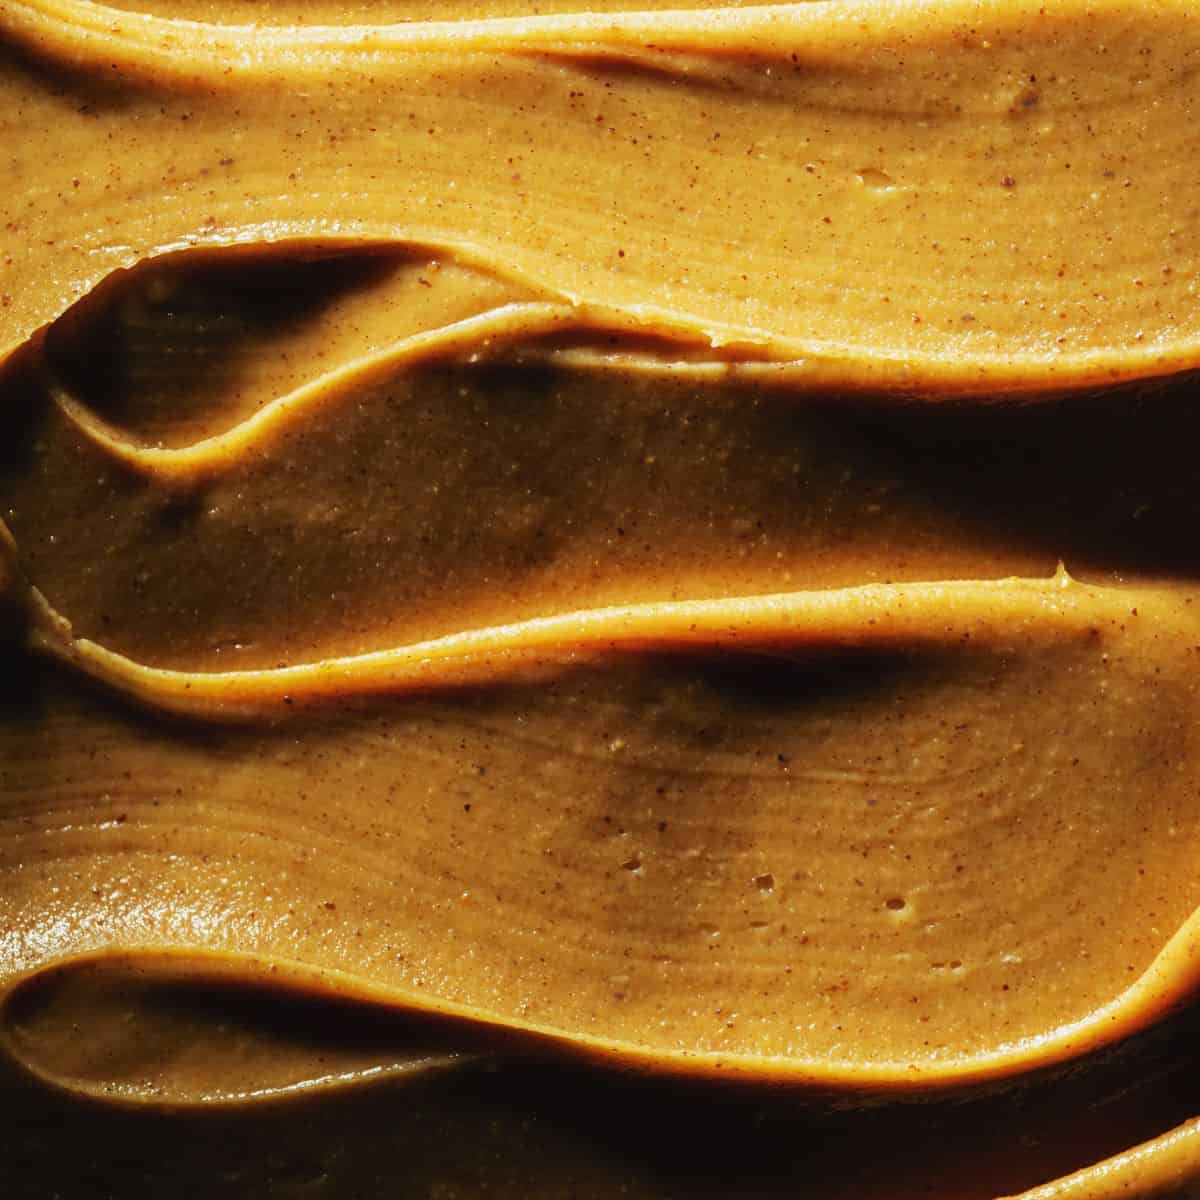 up close of smooth creamy peanut butter swirled around on a plate.